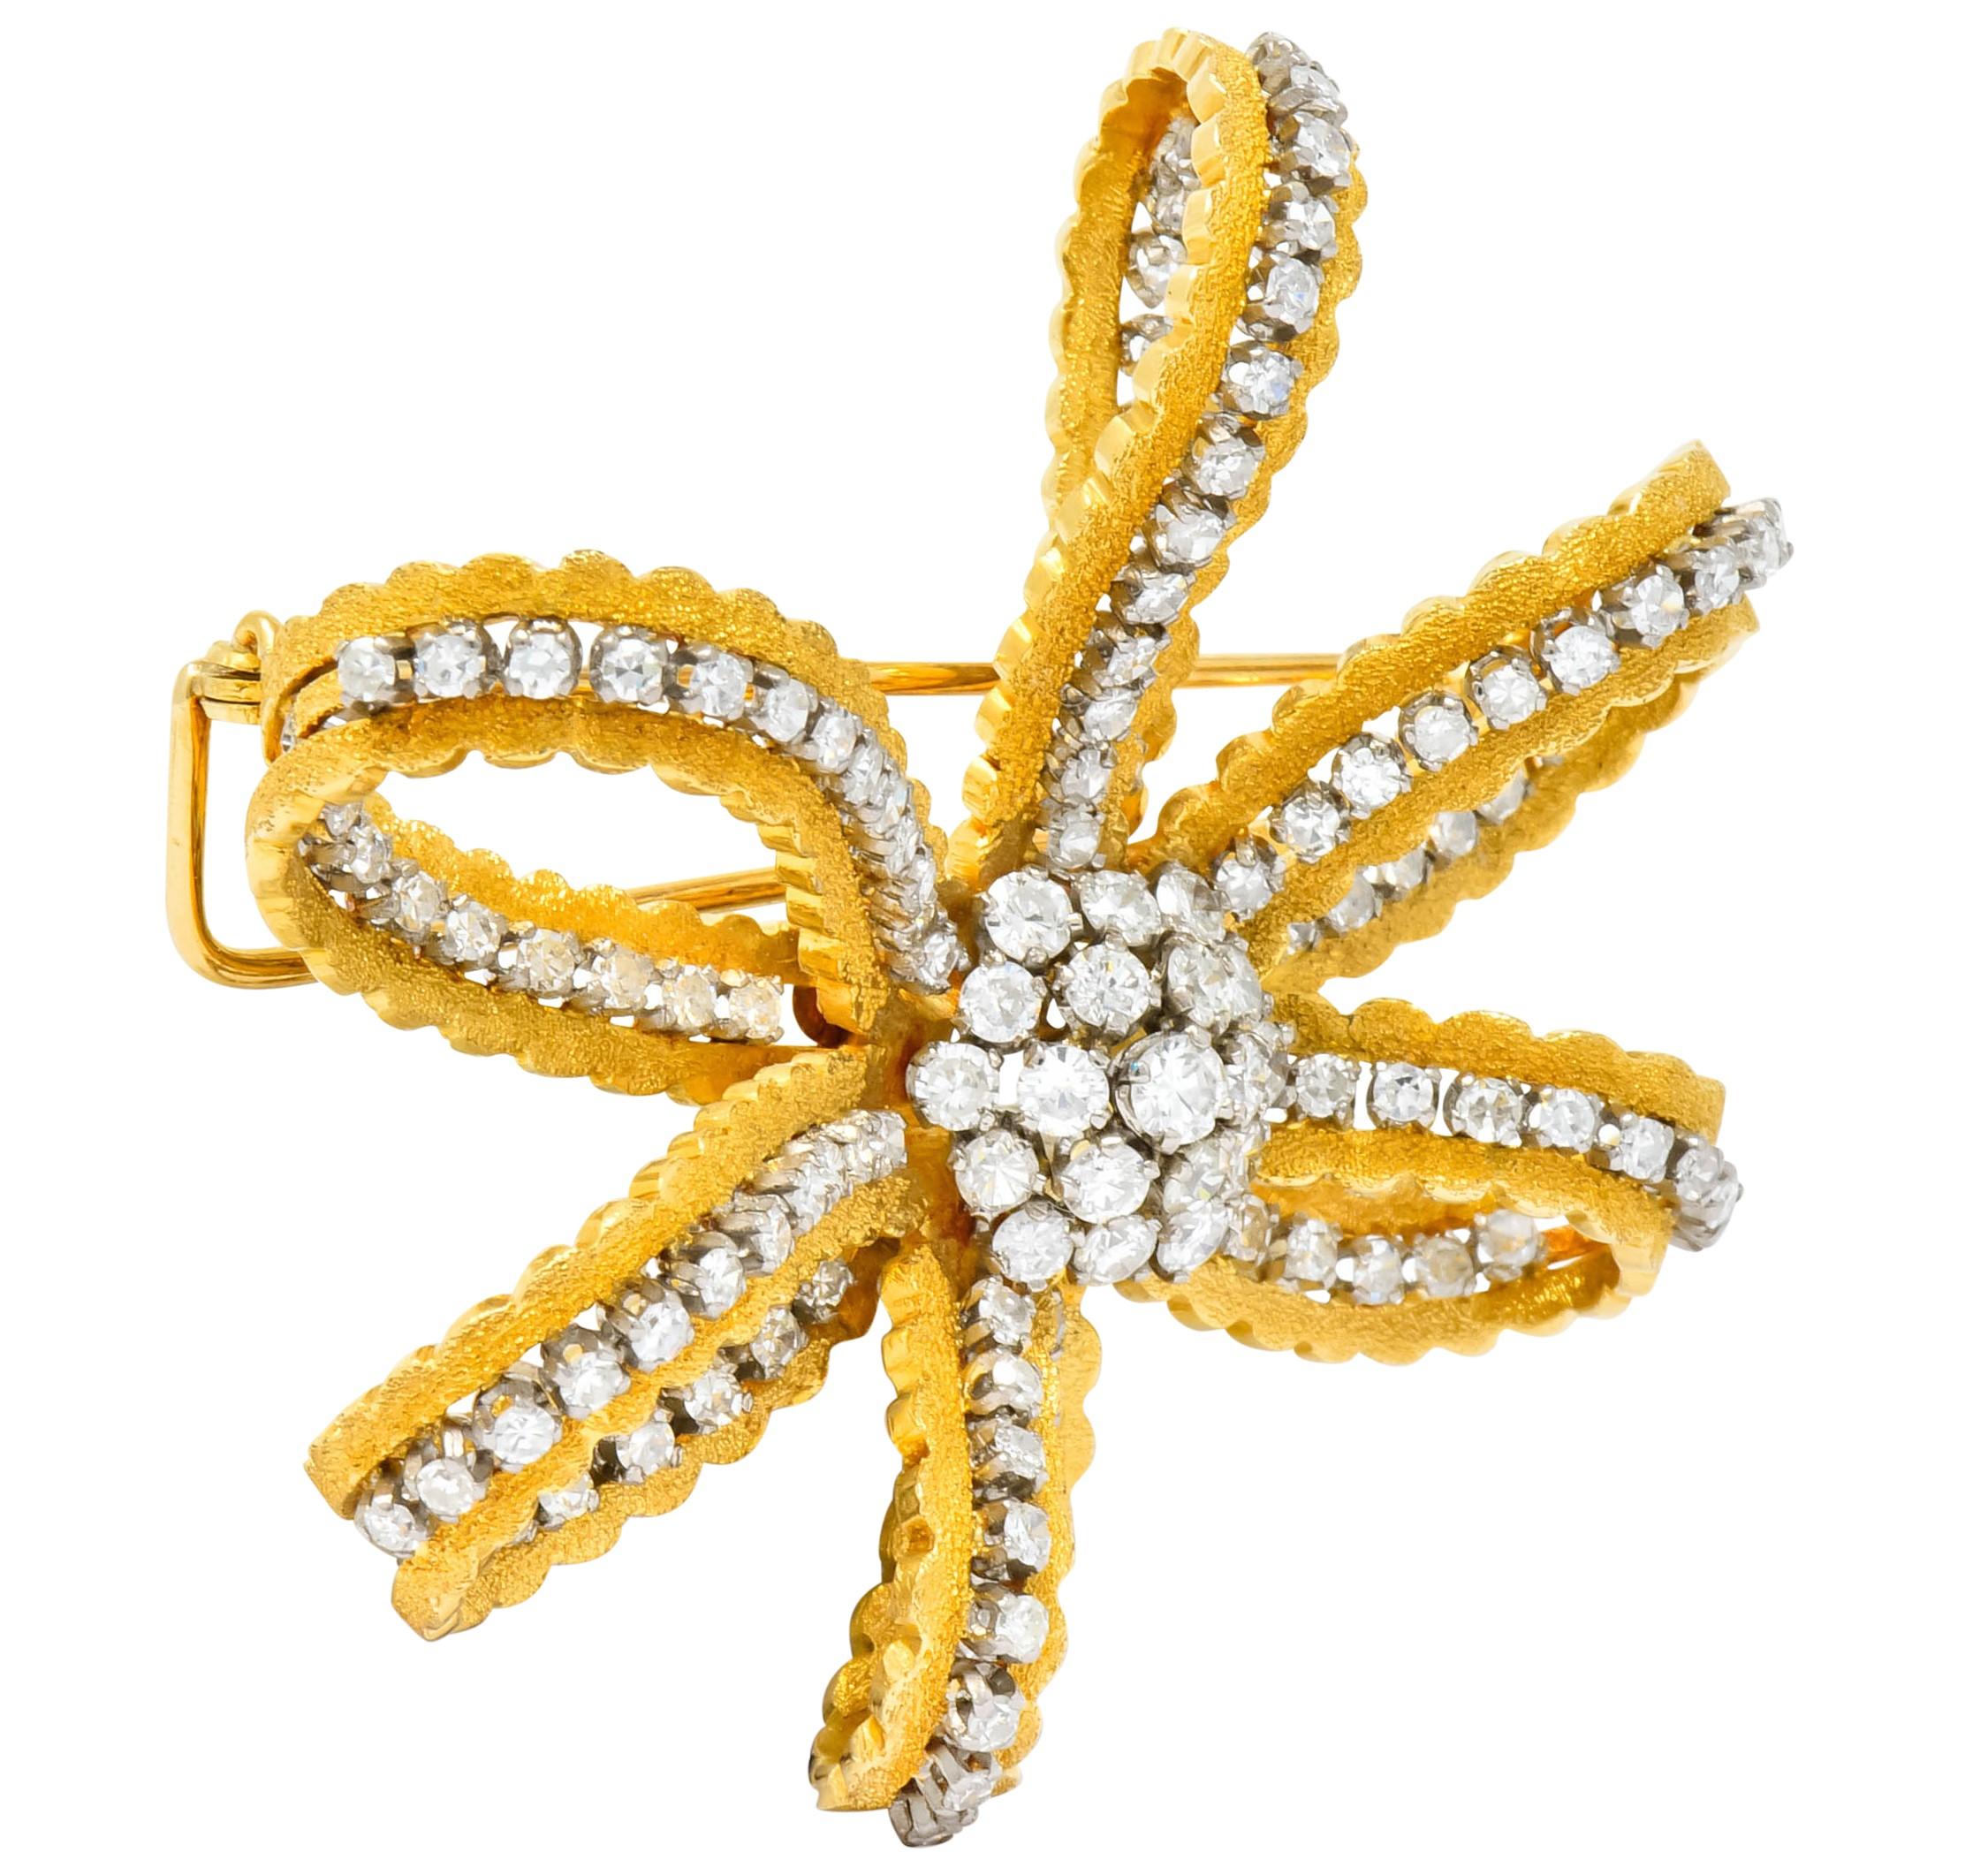 Brooch designed as bow comprised of scalloped ribbon with a stippled matte gold finish

Set throughout with round brilliant cut and single cut diamonds weighing approximately 3.50 carat total, H/I color and VS to SI clarity

Completed by double pin